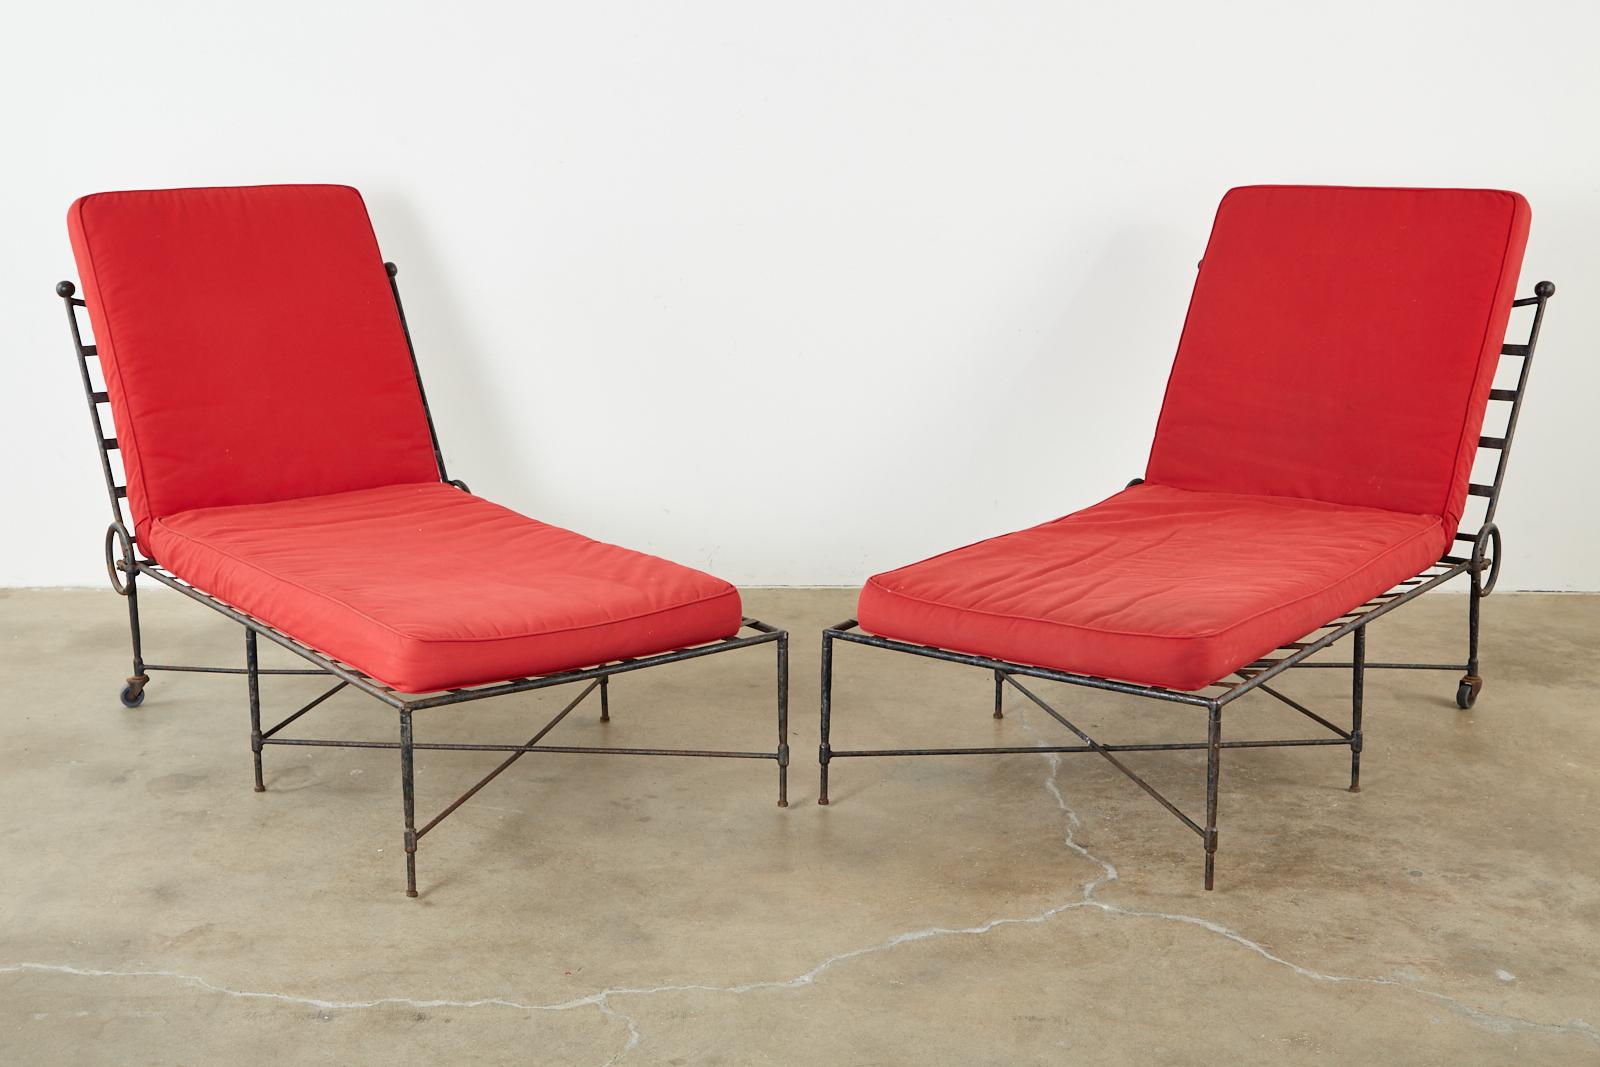 Mid-Century Modern pair of patinated iron garden chaise lounges or daybeds designed by Mario Papperzini for John Salterini. The lounges feature an aged patina with an iconic design and profile. Provenance: From a Michael Smith installation in